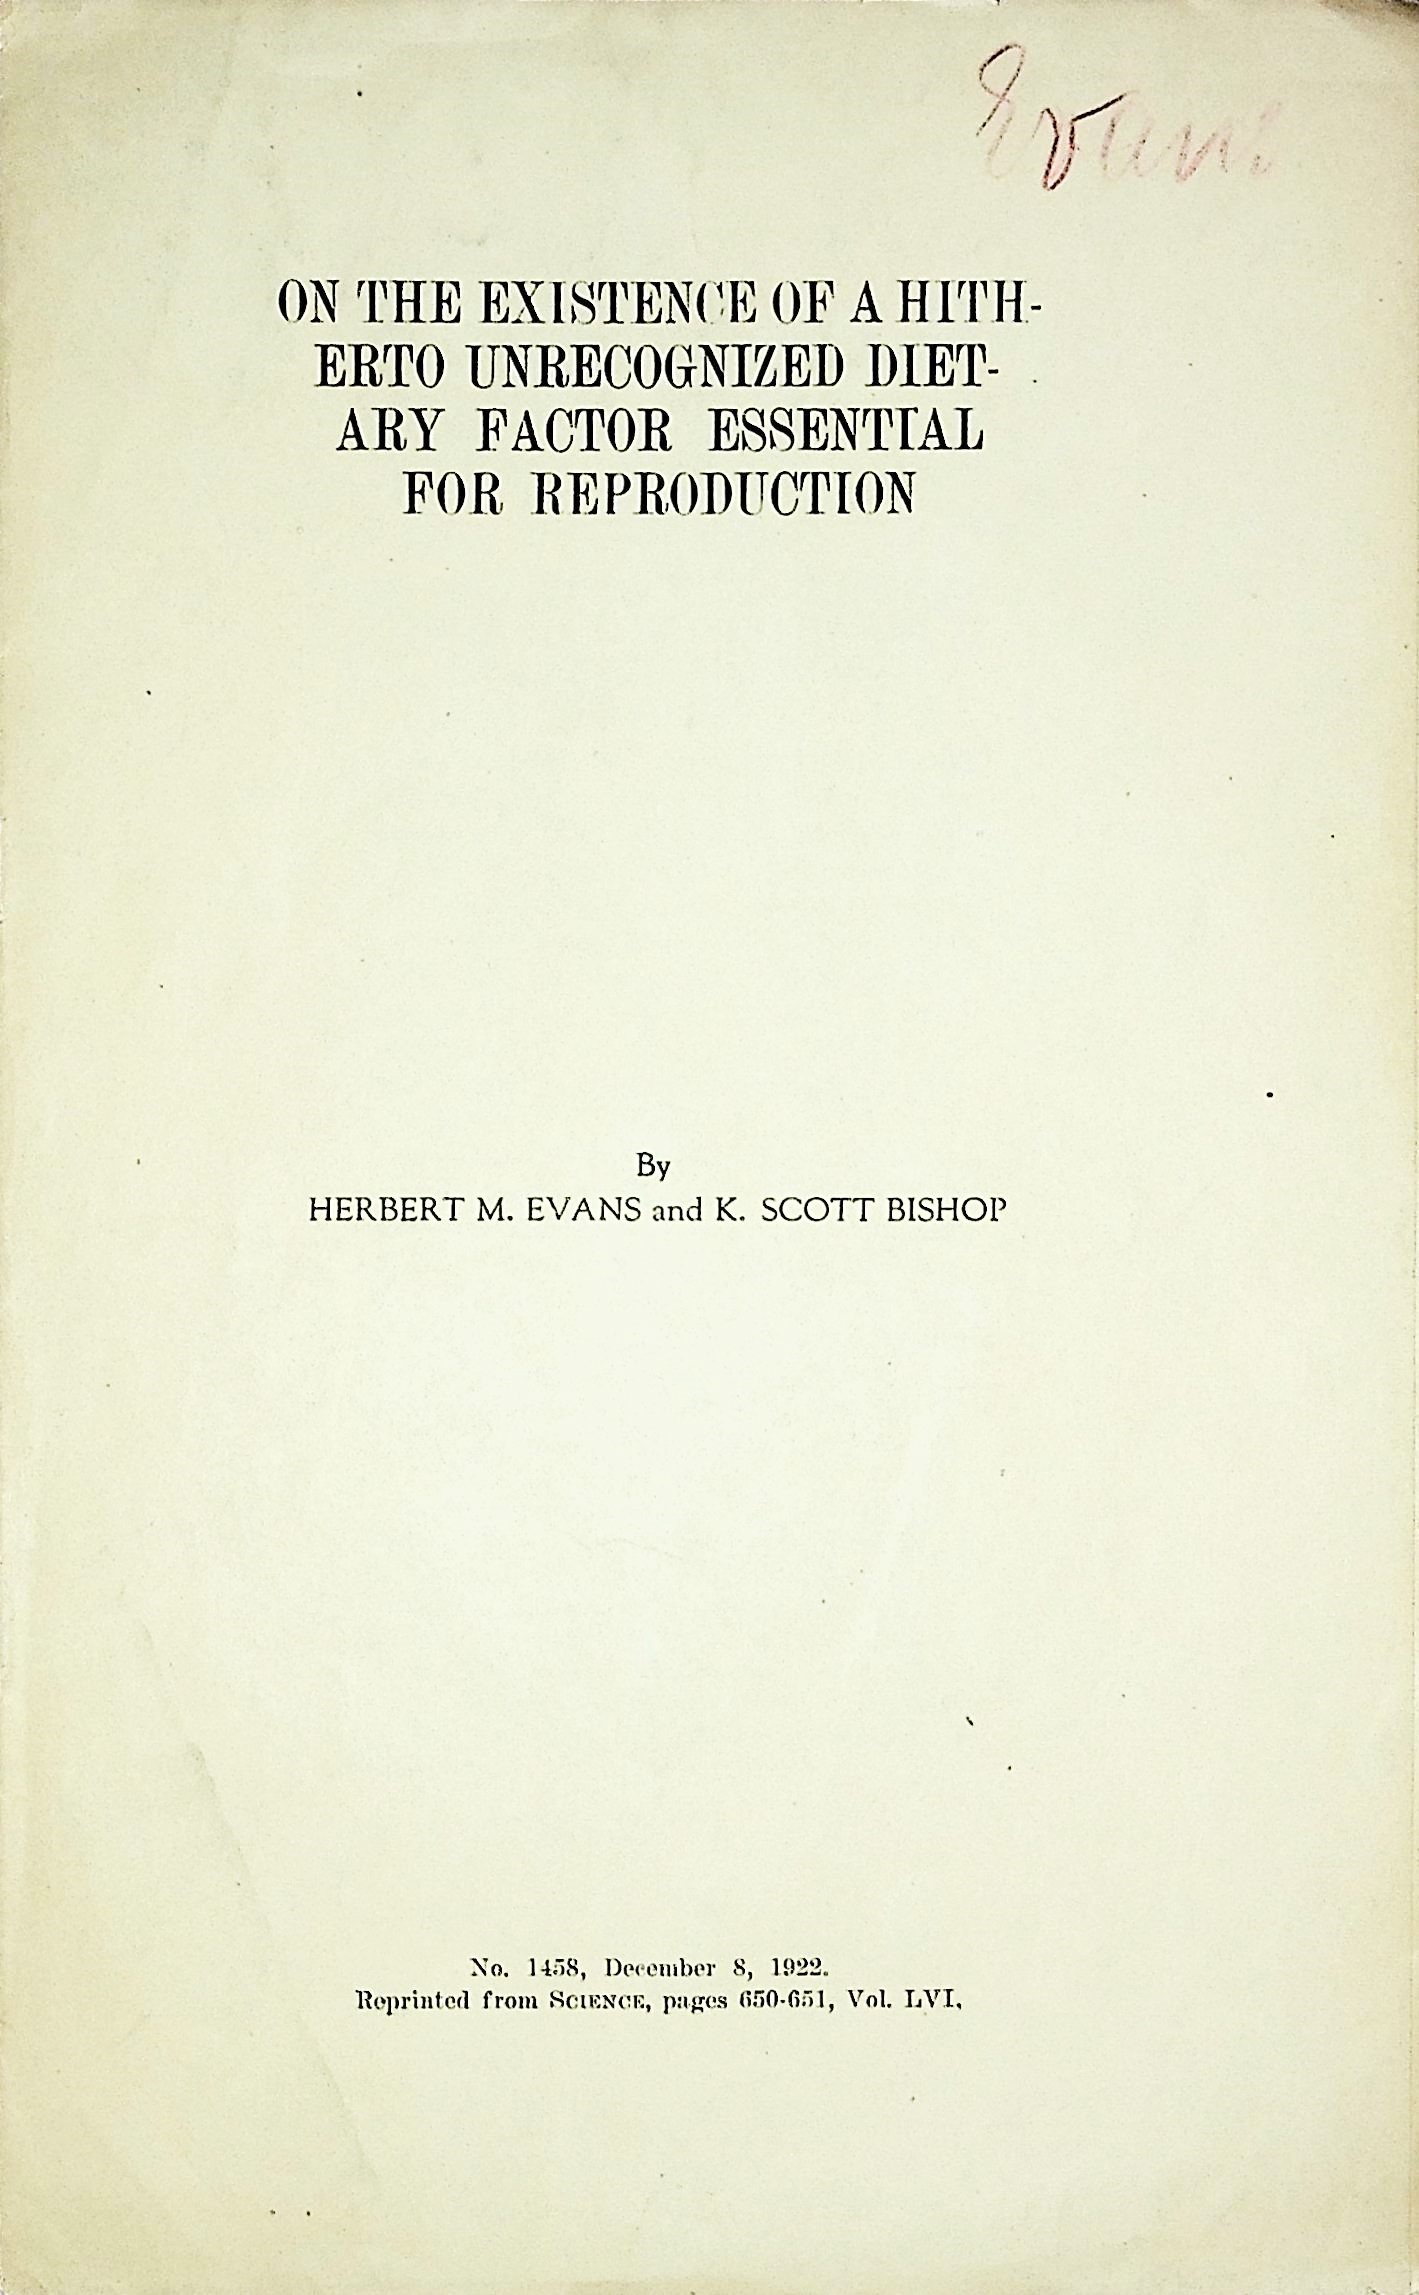 Image for On the existence of a hitherto unrecgnized dietary factor essential for reproduction [2 offprints: 1) Preliminary report in Science, Vol. LVI, pp 650-1, 1922 and 2) Expanded report in Journal of the American Medical Association, Vol. 81, pp 889-892, 1923]